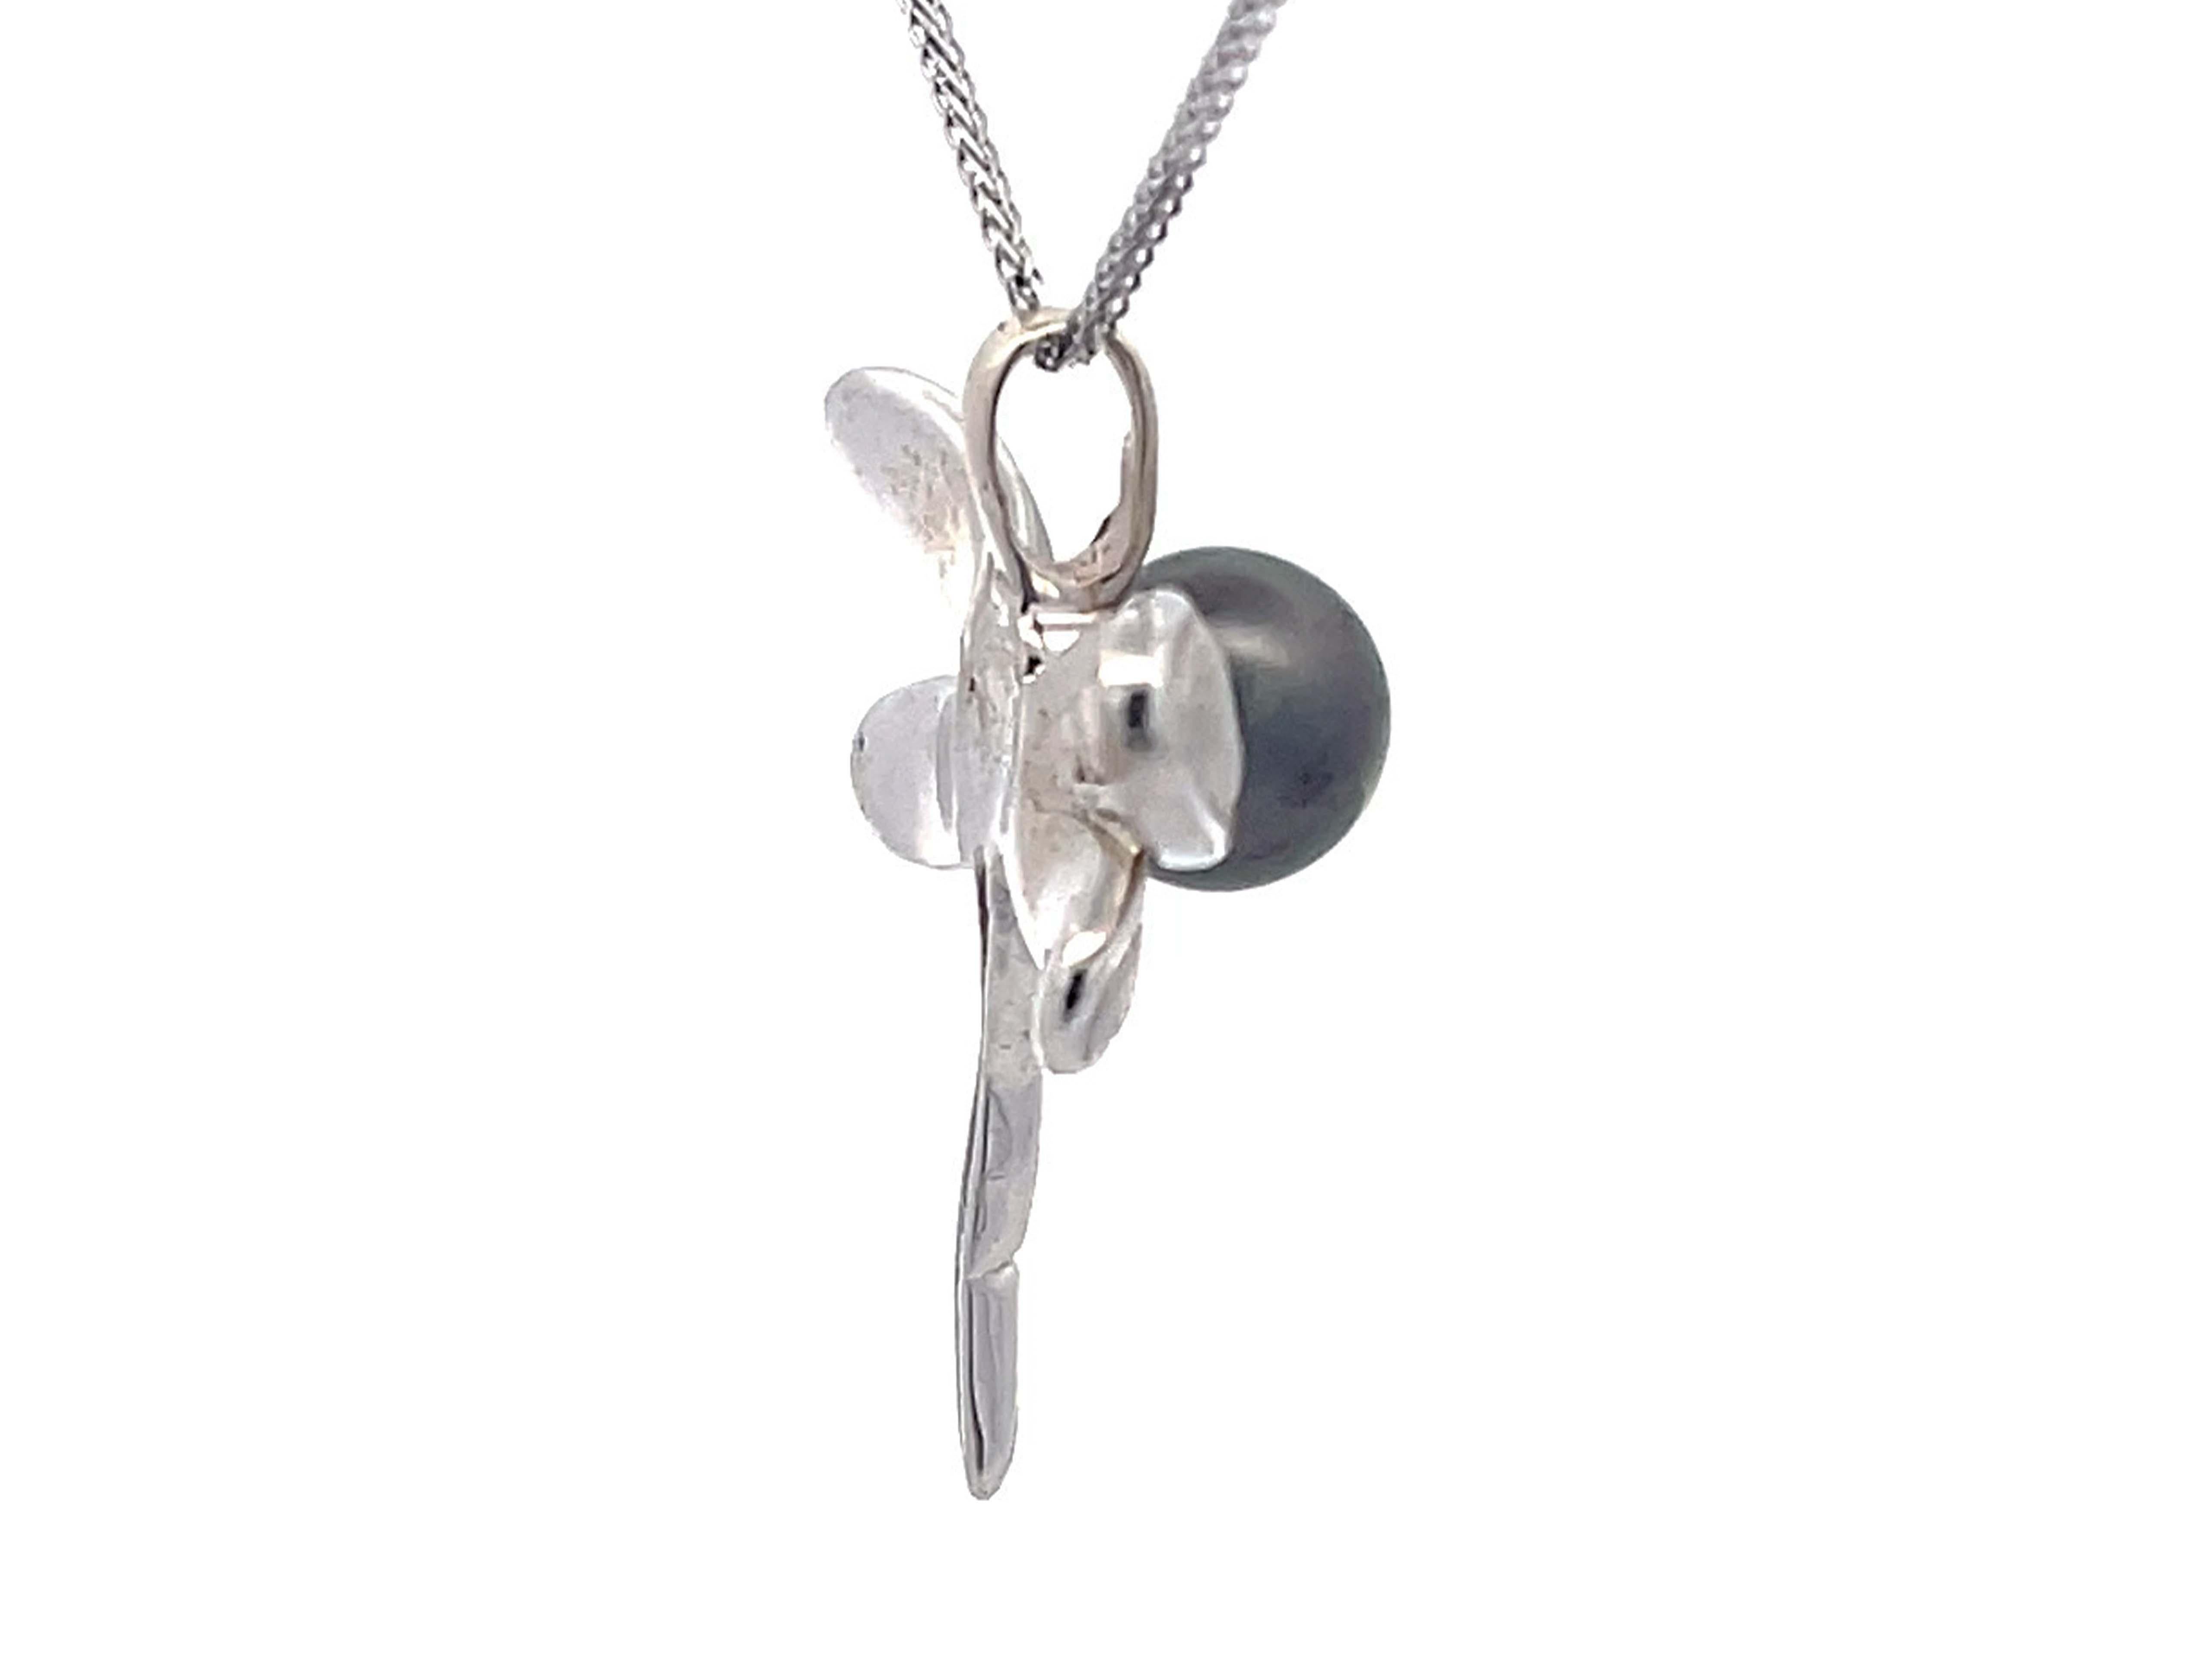 Dragonfly Tahitian Pearl Pendant on Chain in 14k White Gold In Good Condition For Sale In Honolulu, HI